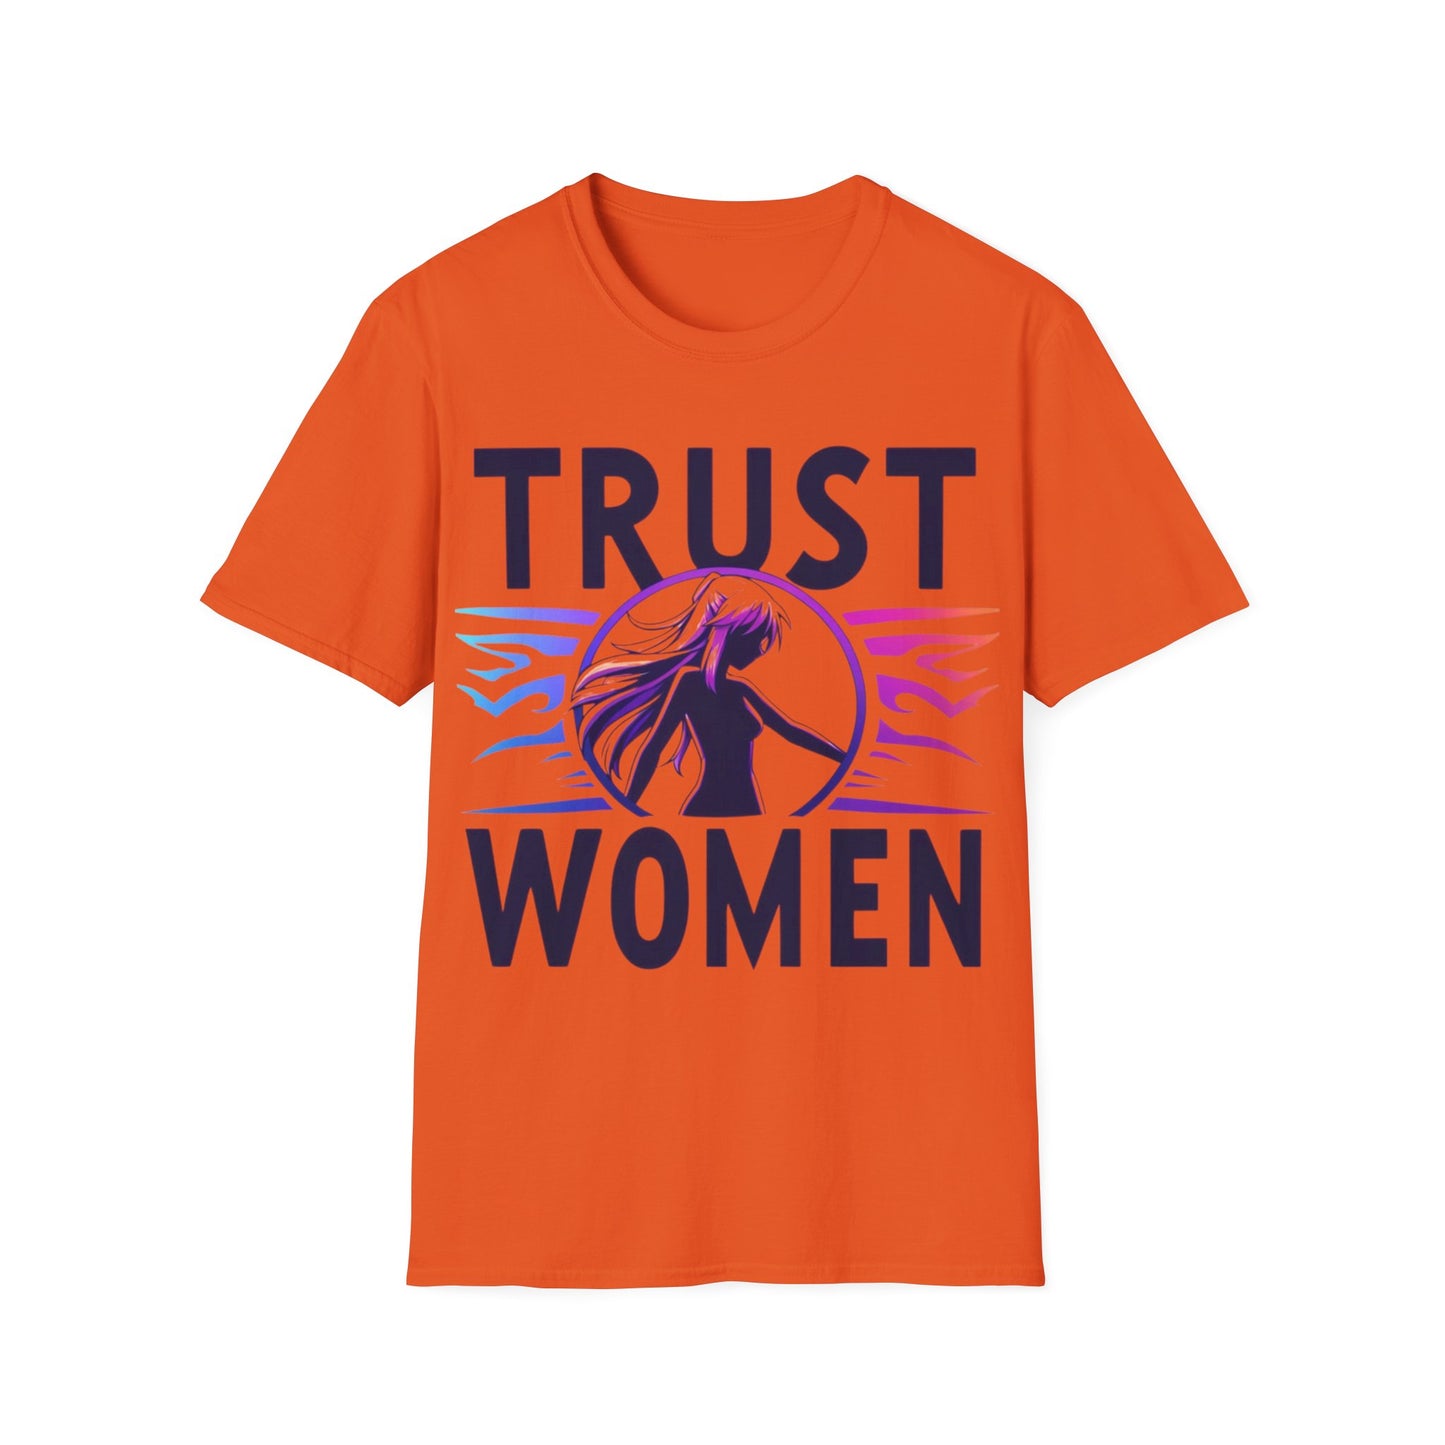 Trust Women! Bold Statement Soft Style T-Shirt: Protest, Demand Equality! Political Shirt!